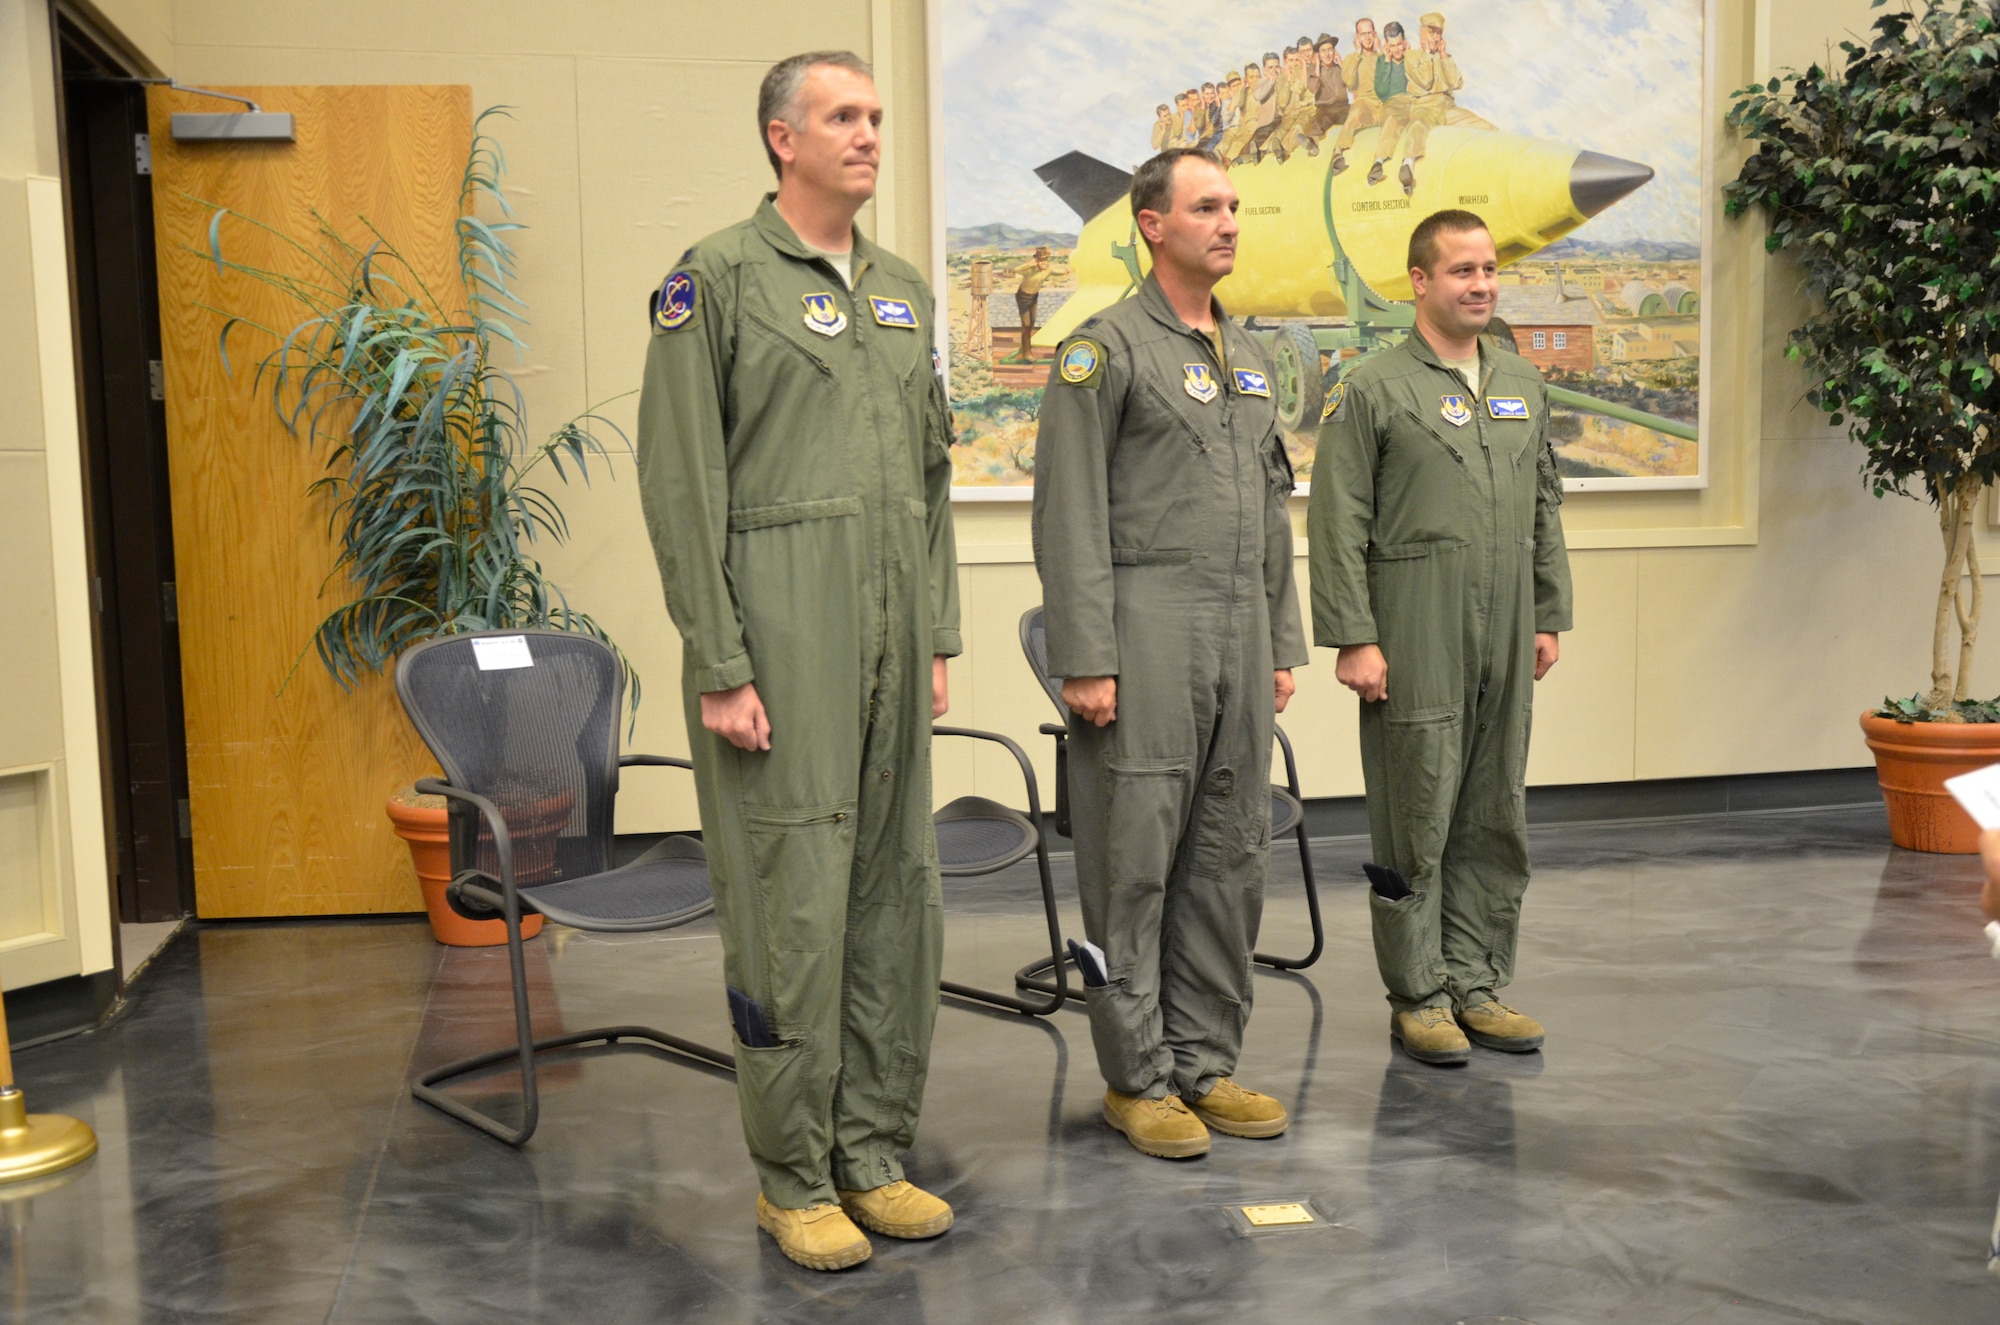 Maj. Joshua Smith, right, prepares to assume command of the 586th Flight Test Squadron, Detachment 1, during a July 13, 2022, change of command ceremony at White Sands Missile Range, New Mexico. Also pictured are Lt. Col. Roman Underwood, center, who relinquished command of the detachment to Smith during the ceremony, and Lt. Col. Alex Wolfard, then-commander of the 586th Flight Test Squadron at Holloman Air Force Base, New Mexico. (U.S. Army photo by Anne Marie Chadima)